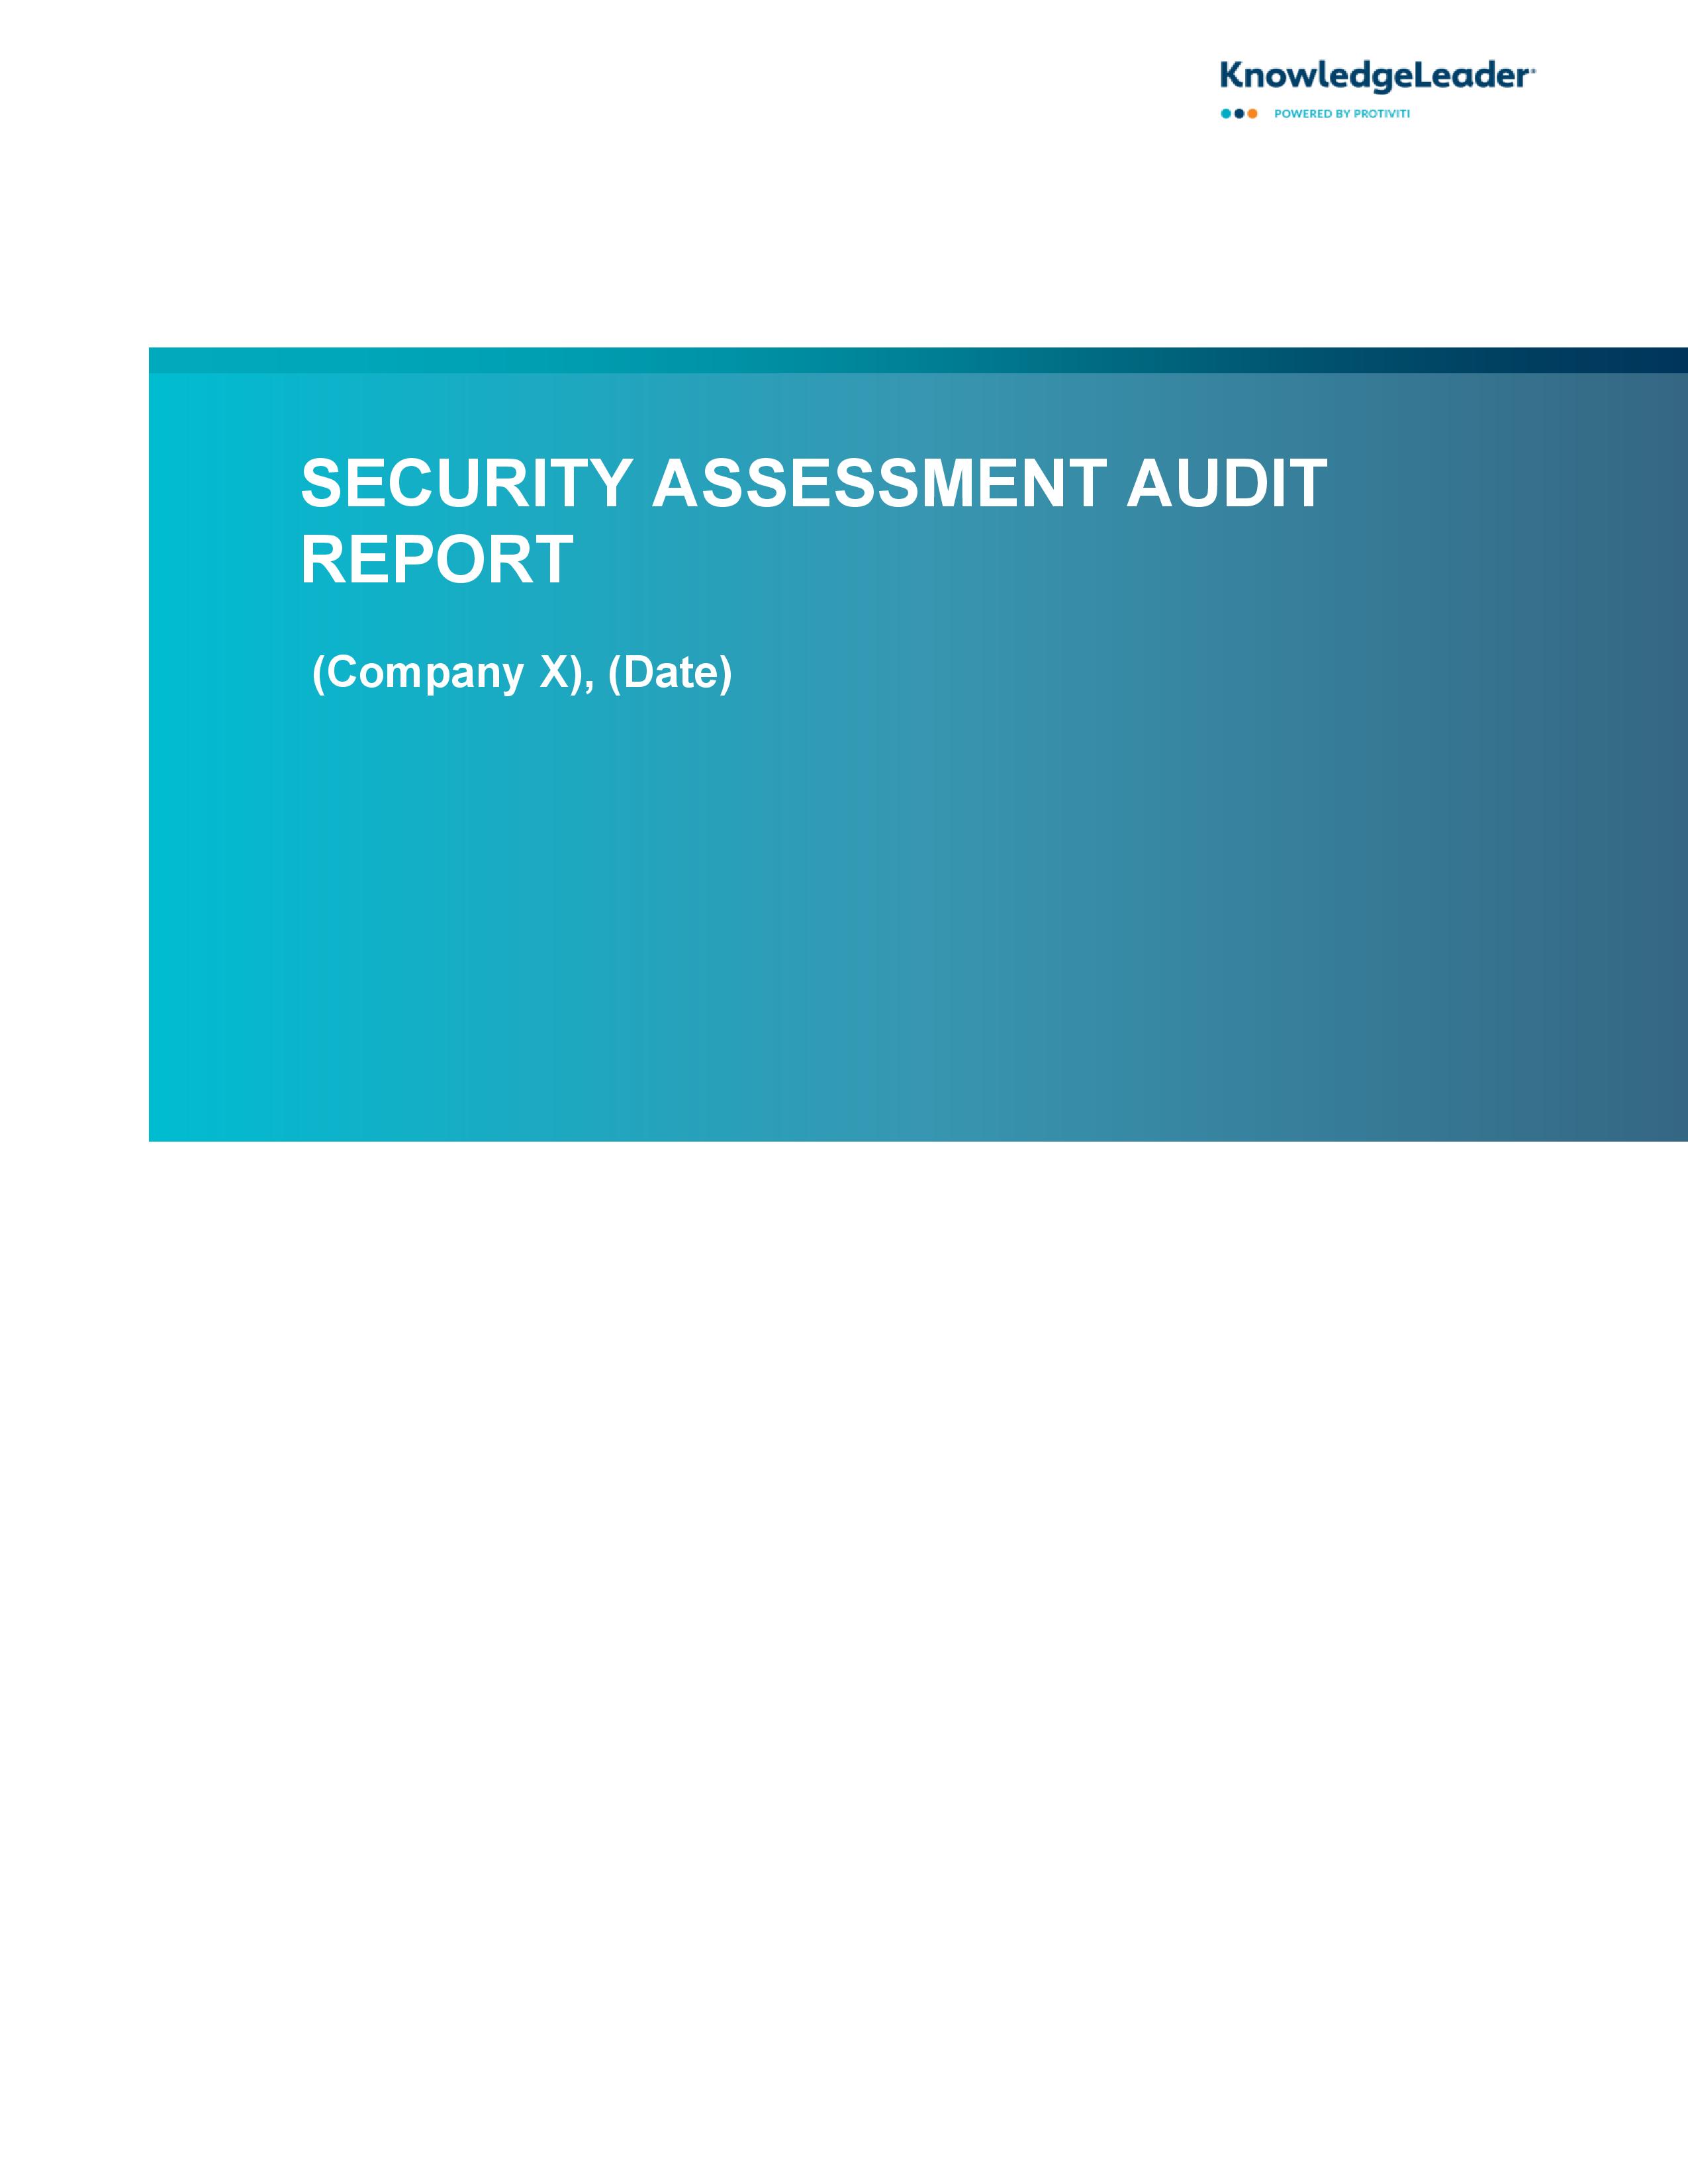 screenshot of the first page of the Security Assessment Audit Report